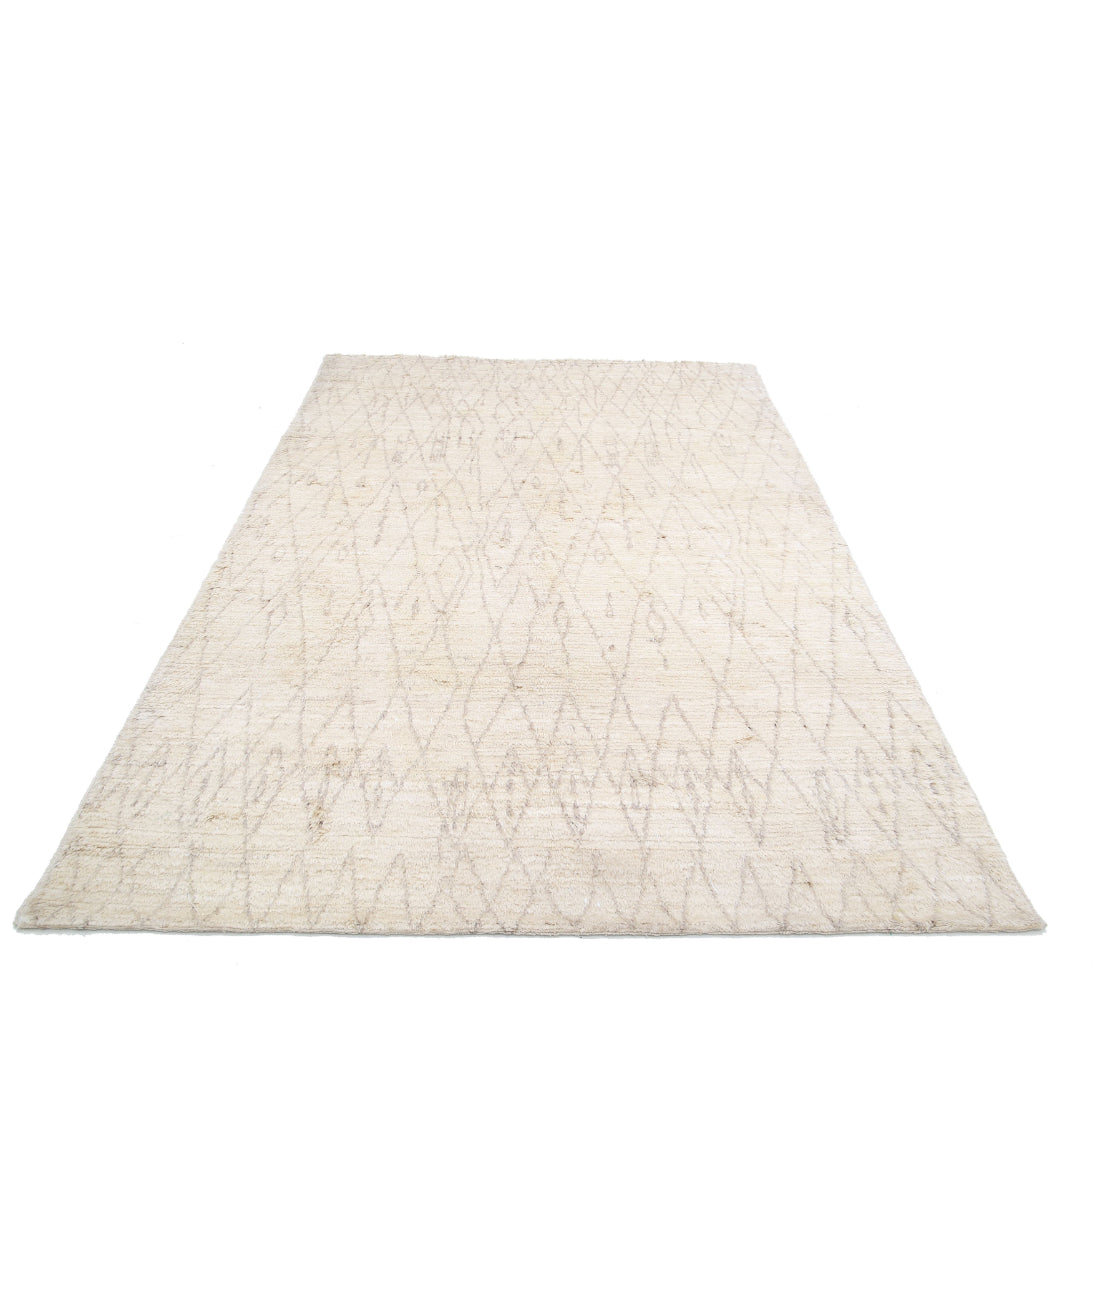 Hand Knotted Tribal Moroccan Wool Rug - 6'0'' x 9'0'' 6'0'' x 9'0'' (180 X 270) / Ivory / Taupe